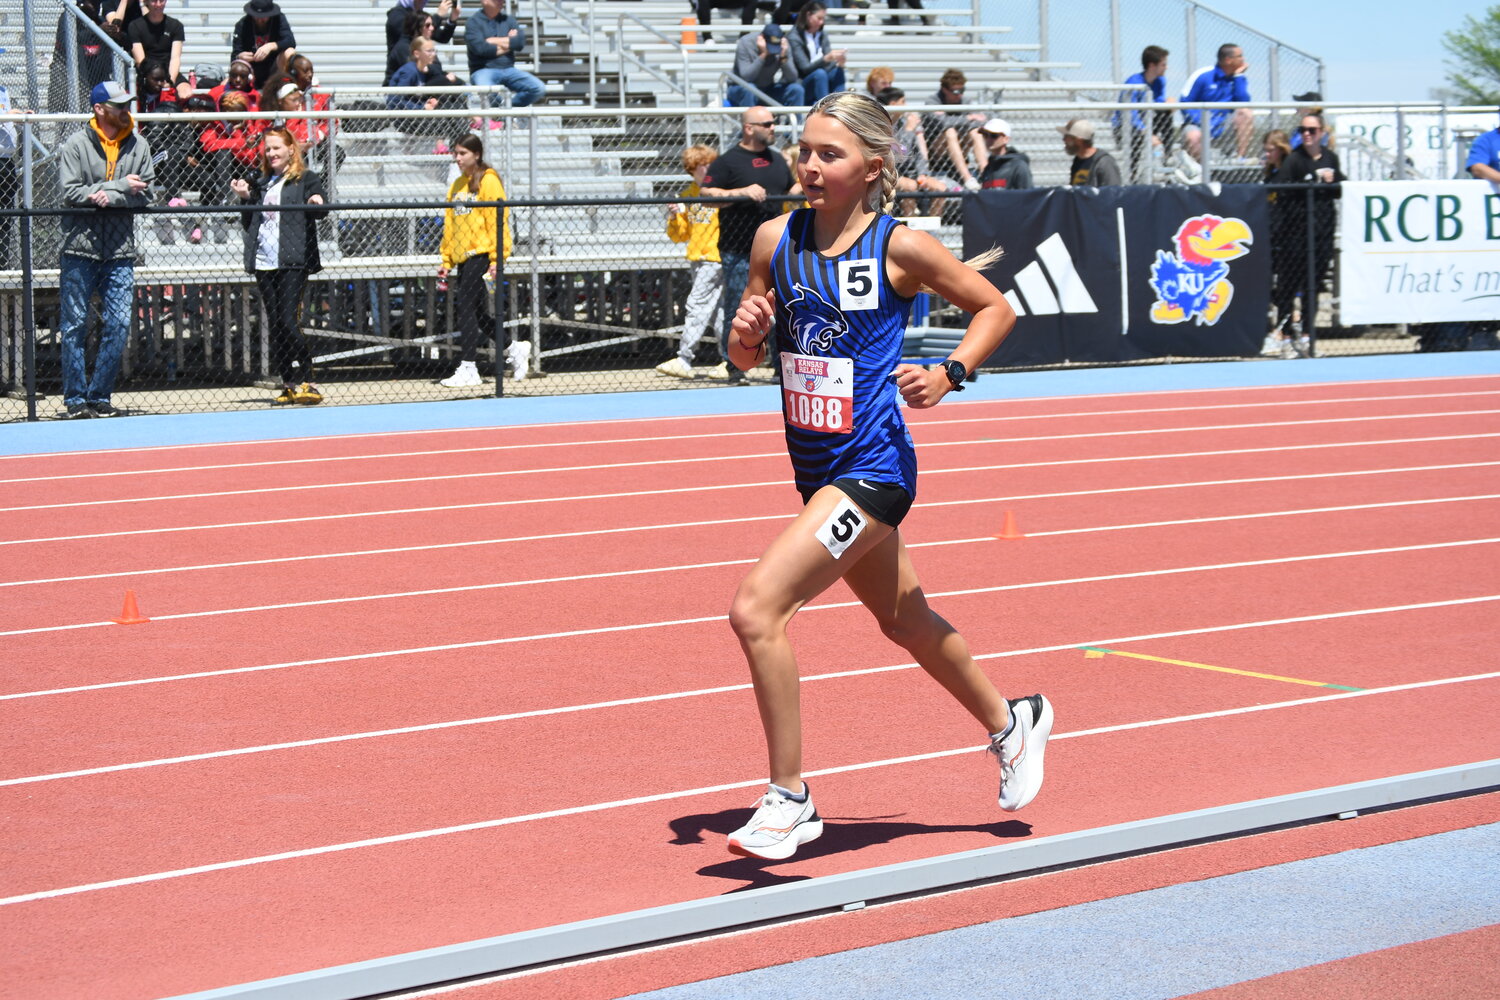 Harrisonville junior Kayleigh Norris once again broke her 1,600-meter run school record. She won the district 1,600 run in a time of 4:50.96 to break the record. She also won the 800- and 3,200-meter runs at the meet.